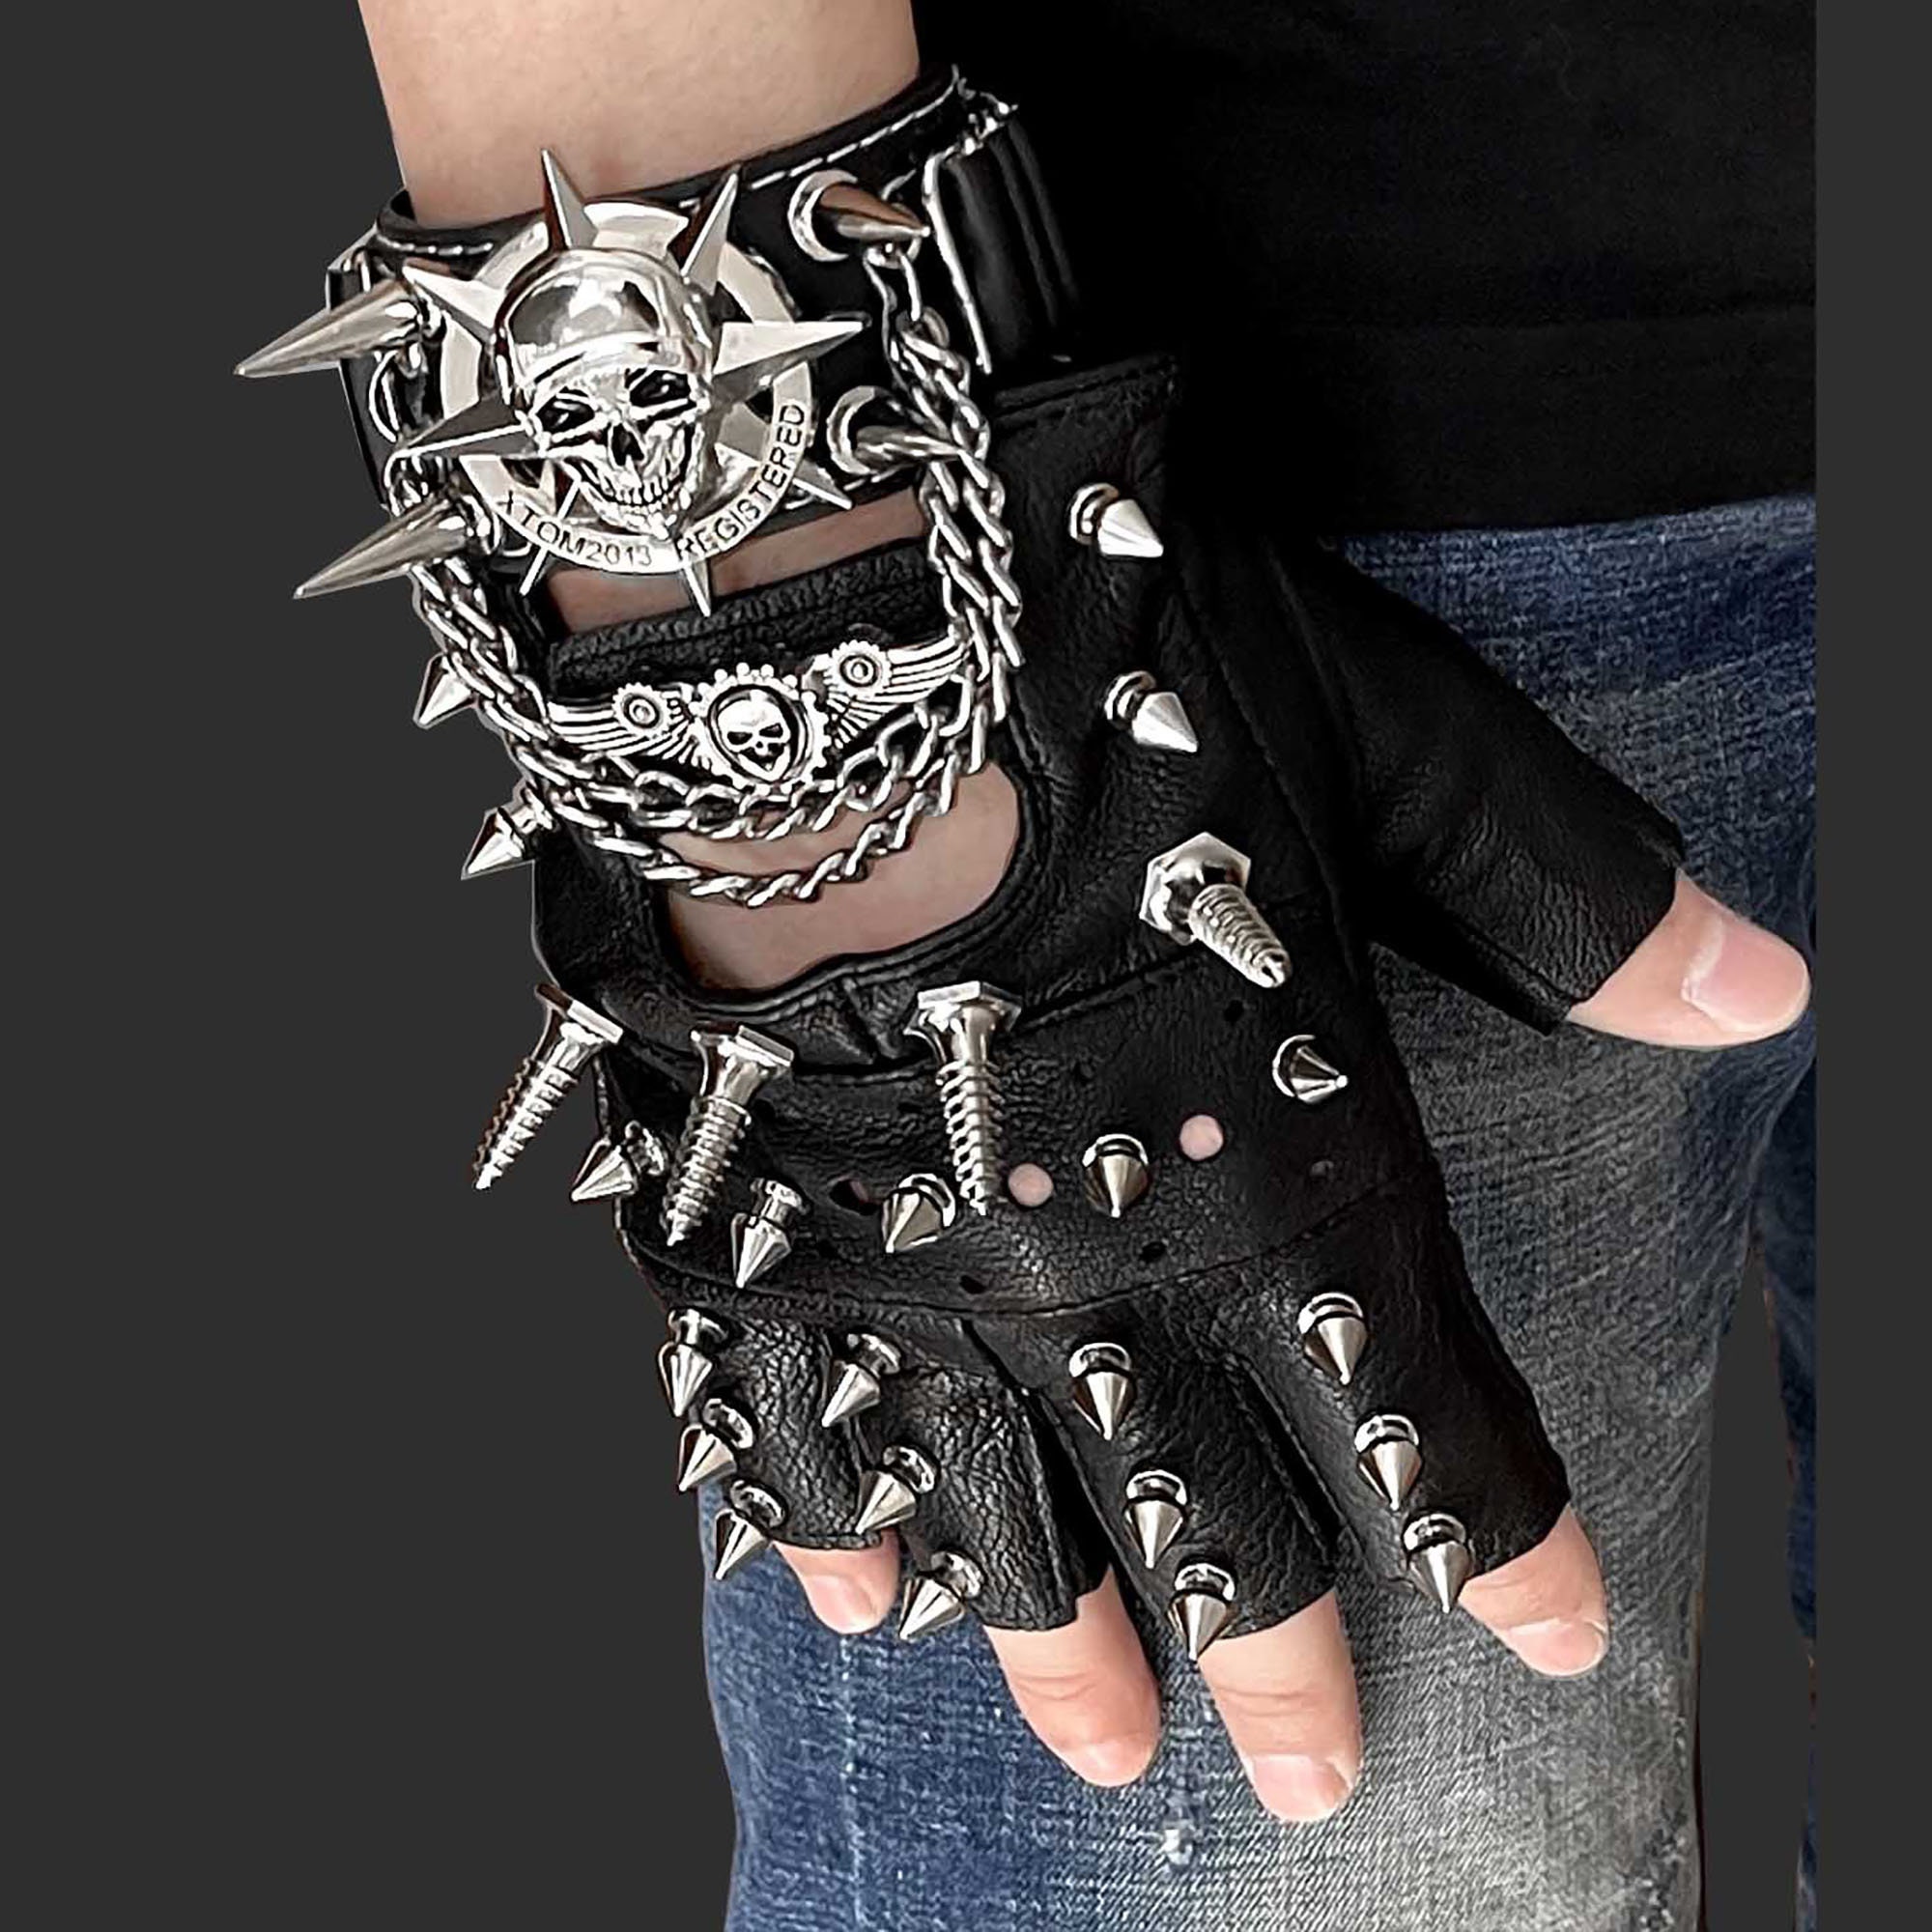 80's Metal - Spiked & Chained Leather Studded Fingerless Gloves